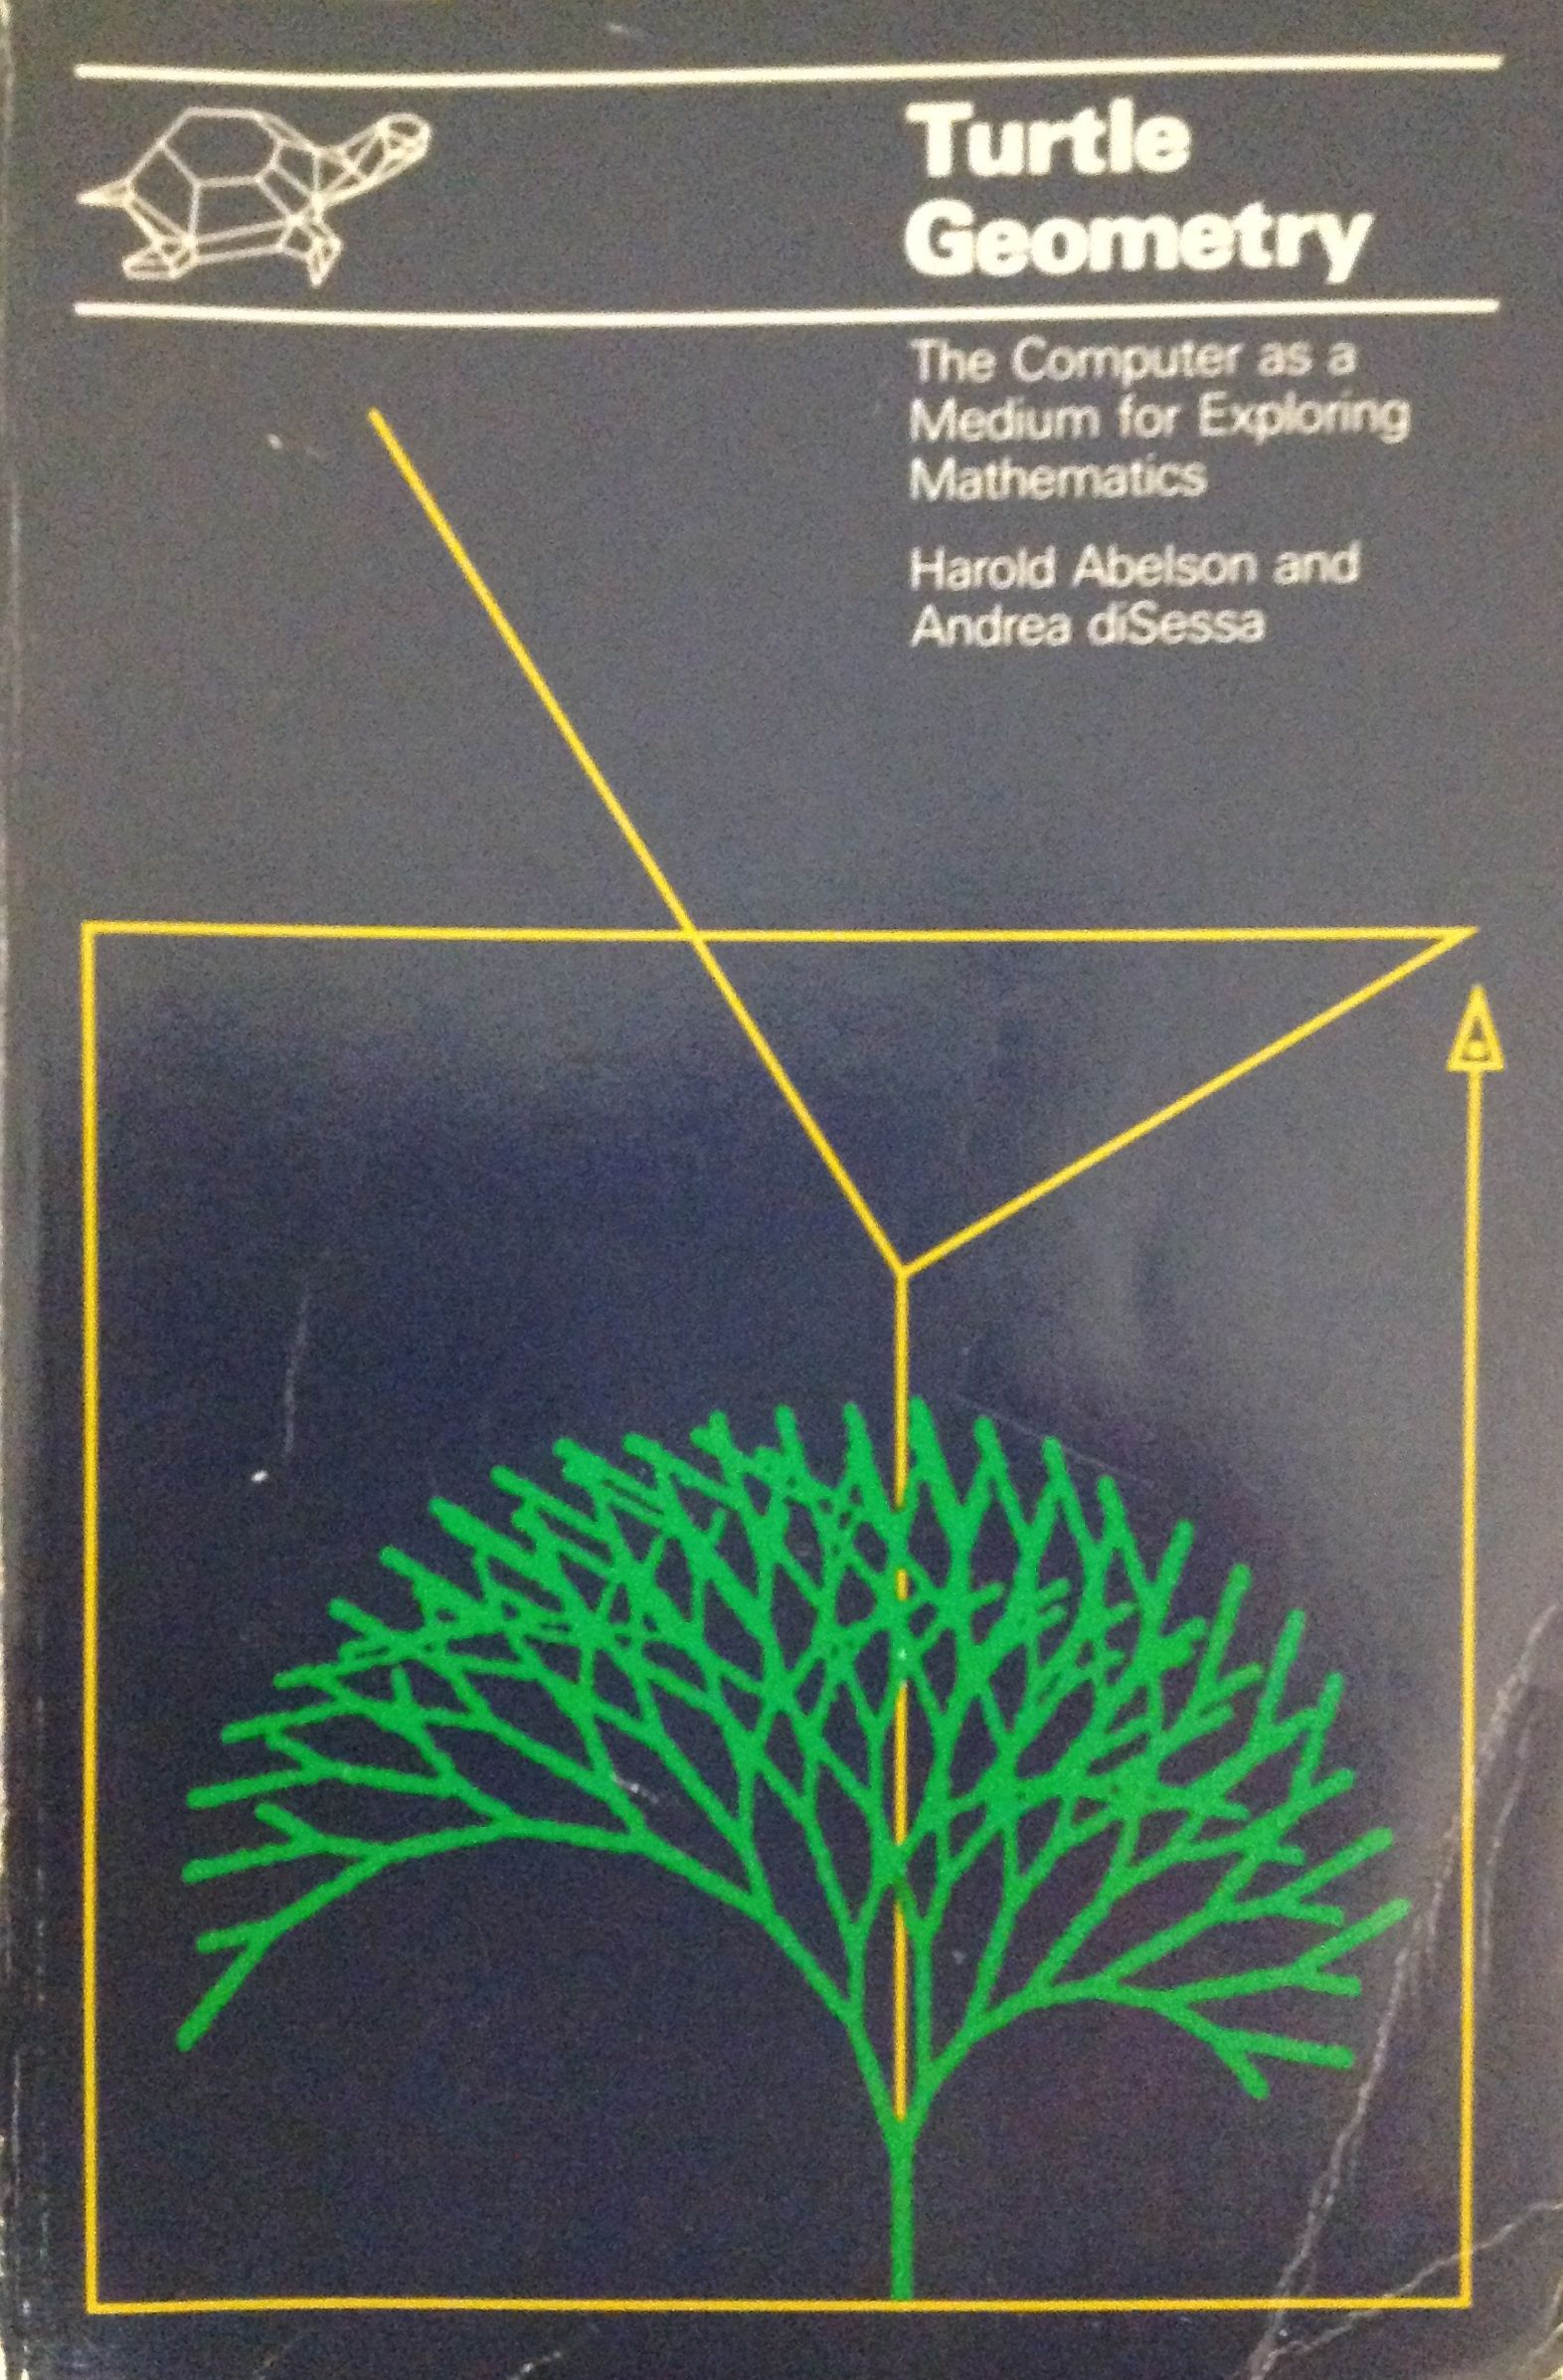 a scan of the cover of the book about turtle geometry